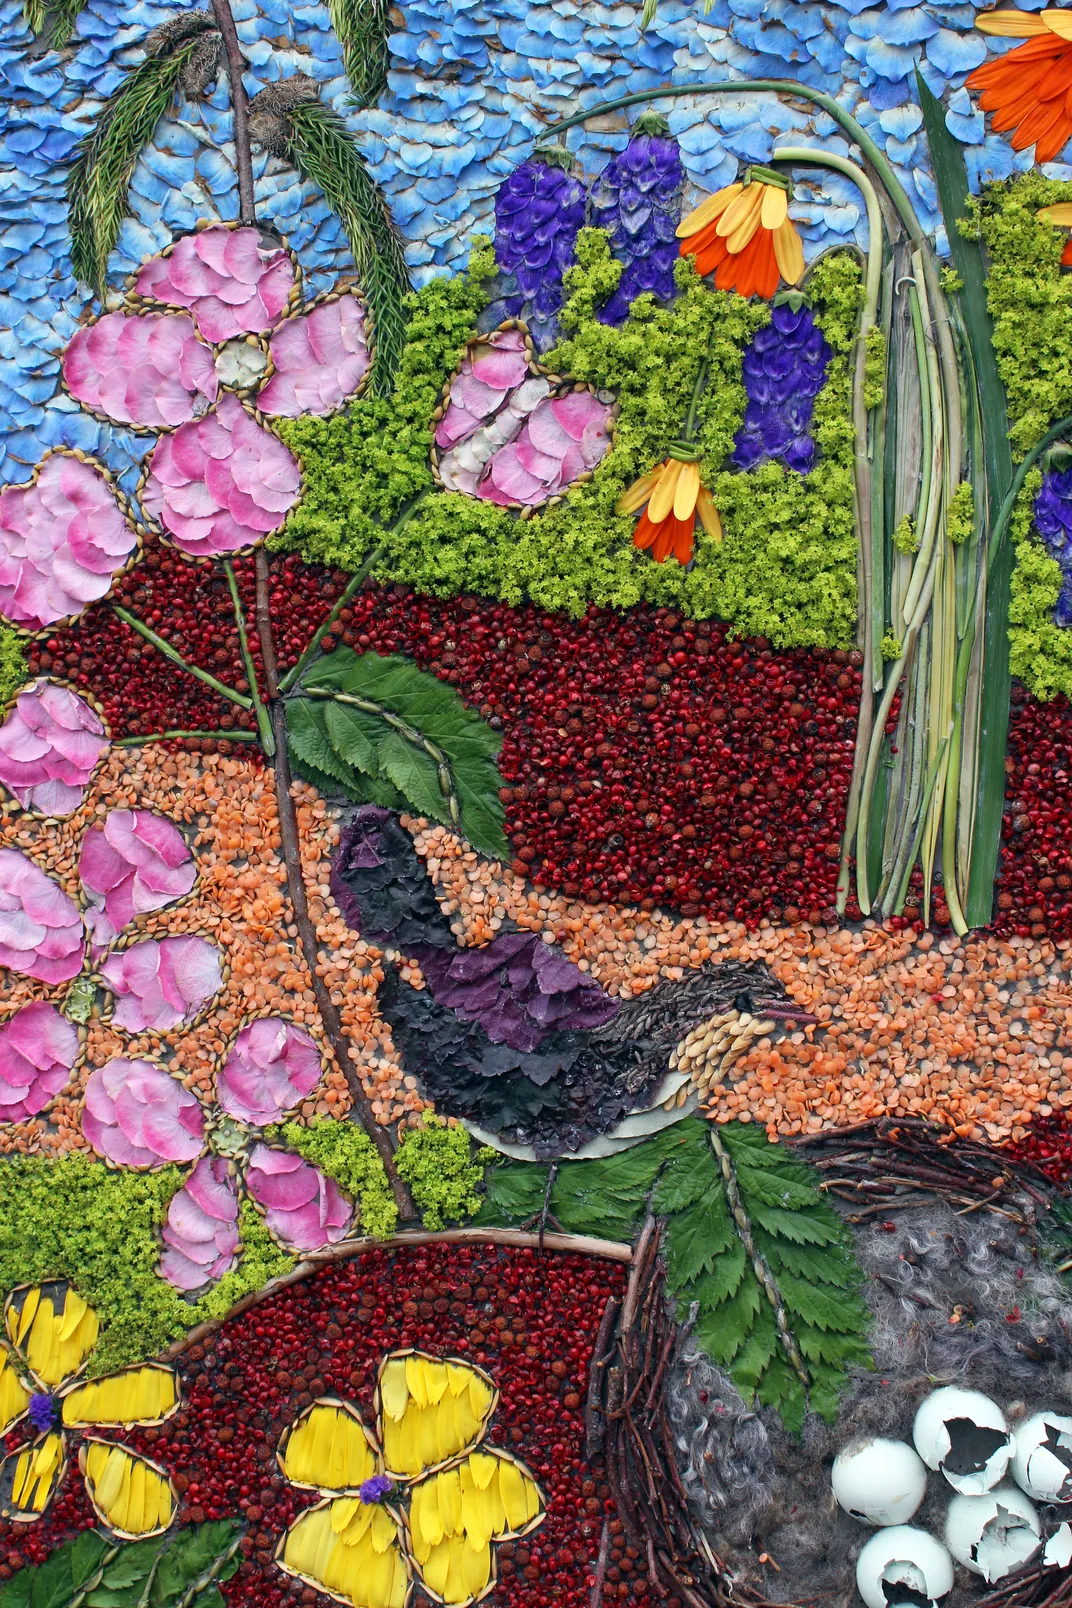 England's 'Well Dressing' Tradition Features Striking, Elaborate Floral Murals